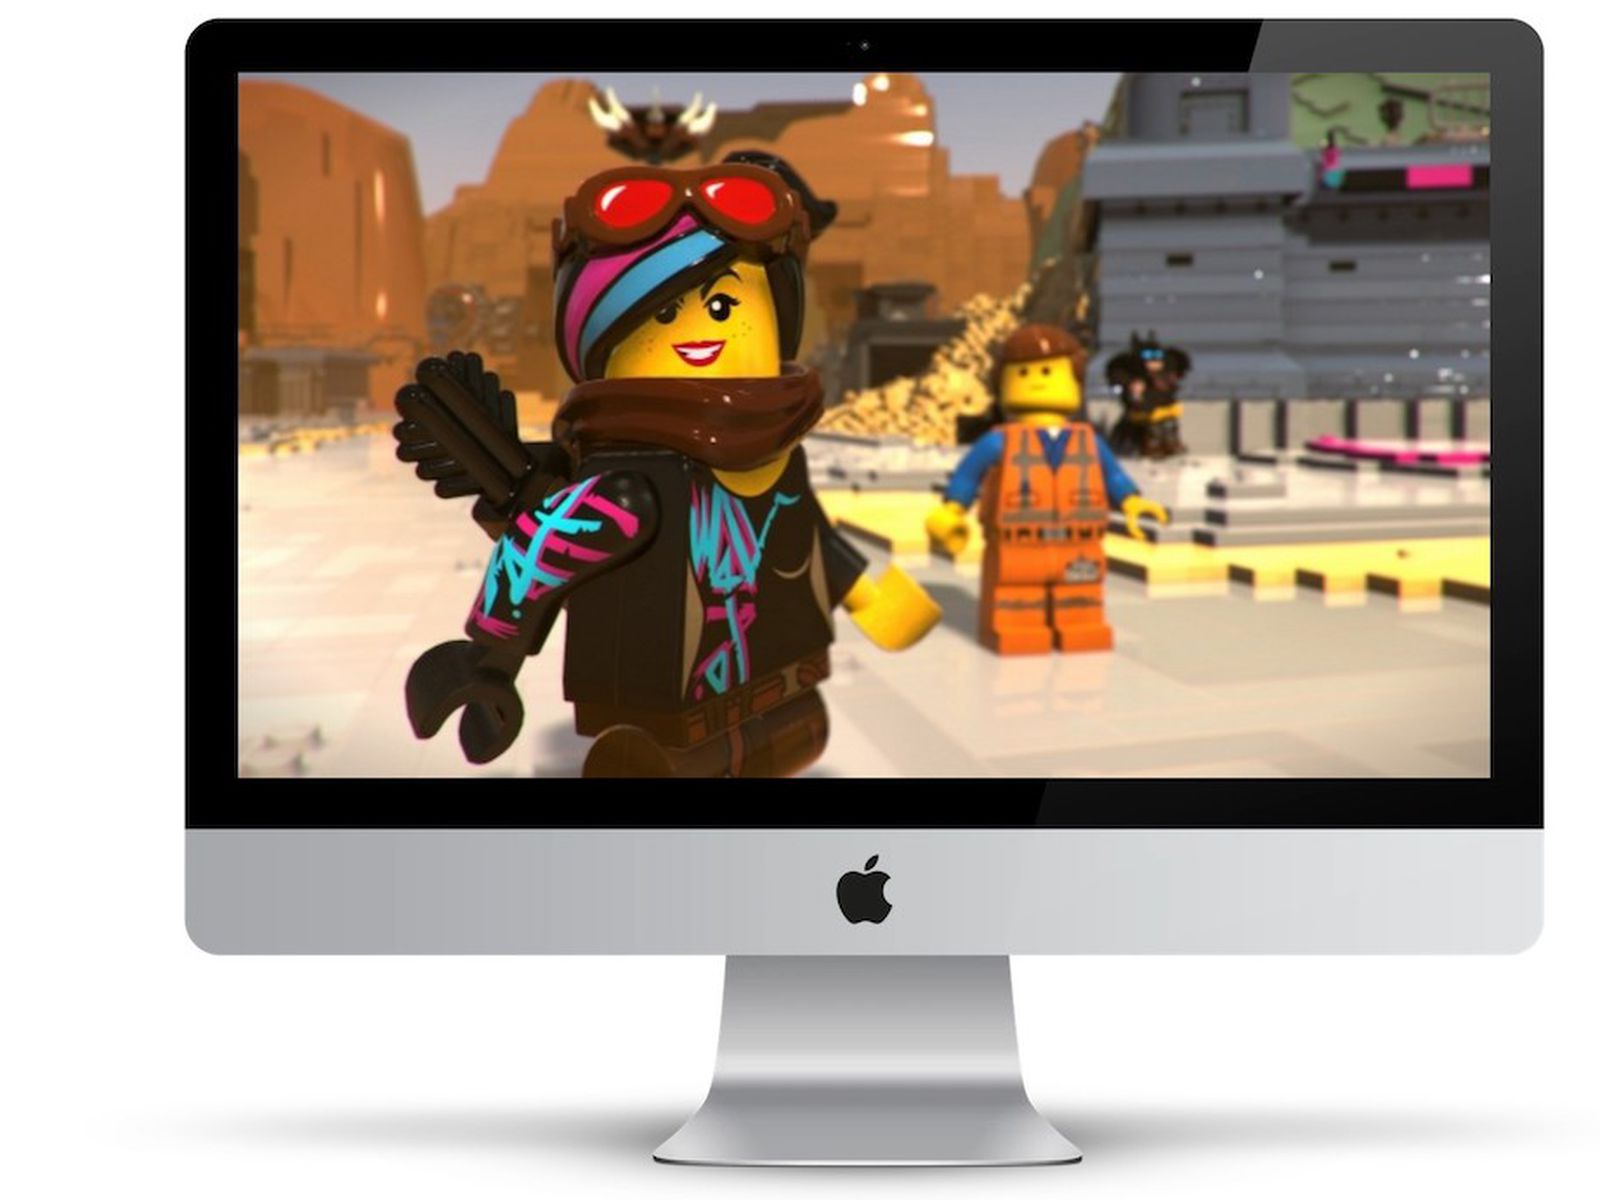 tårn dyd Få Feral Announces 'The LEGO Movie 2 Videogame' Coming to Mac on March 14 -  MacRumors